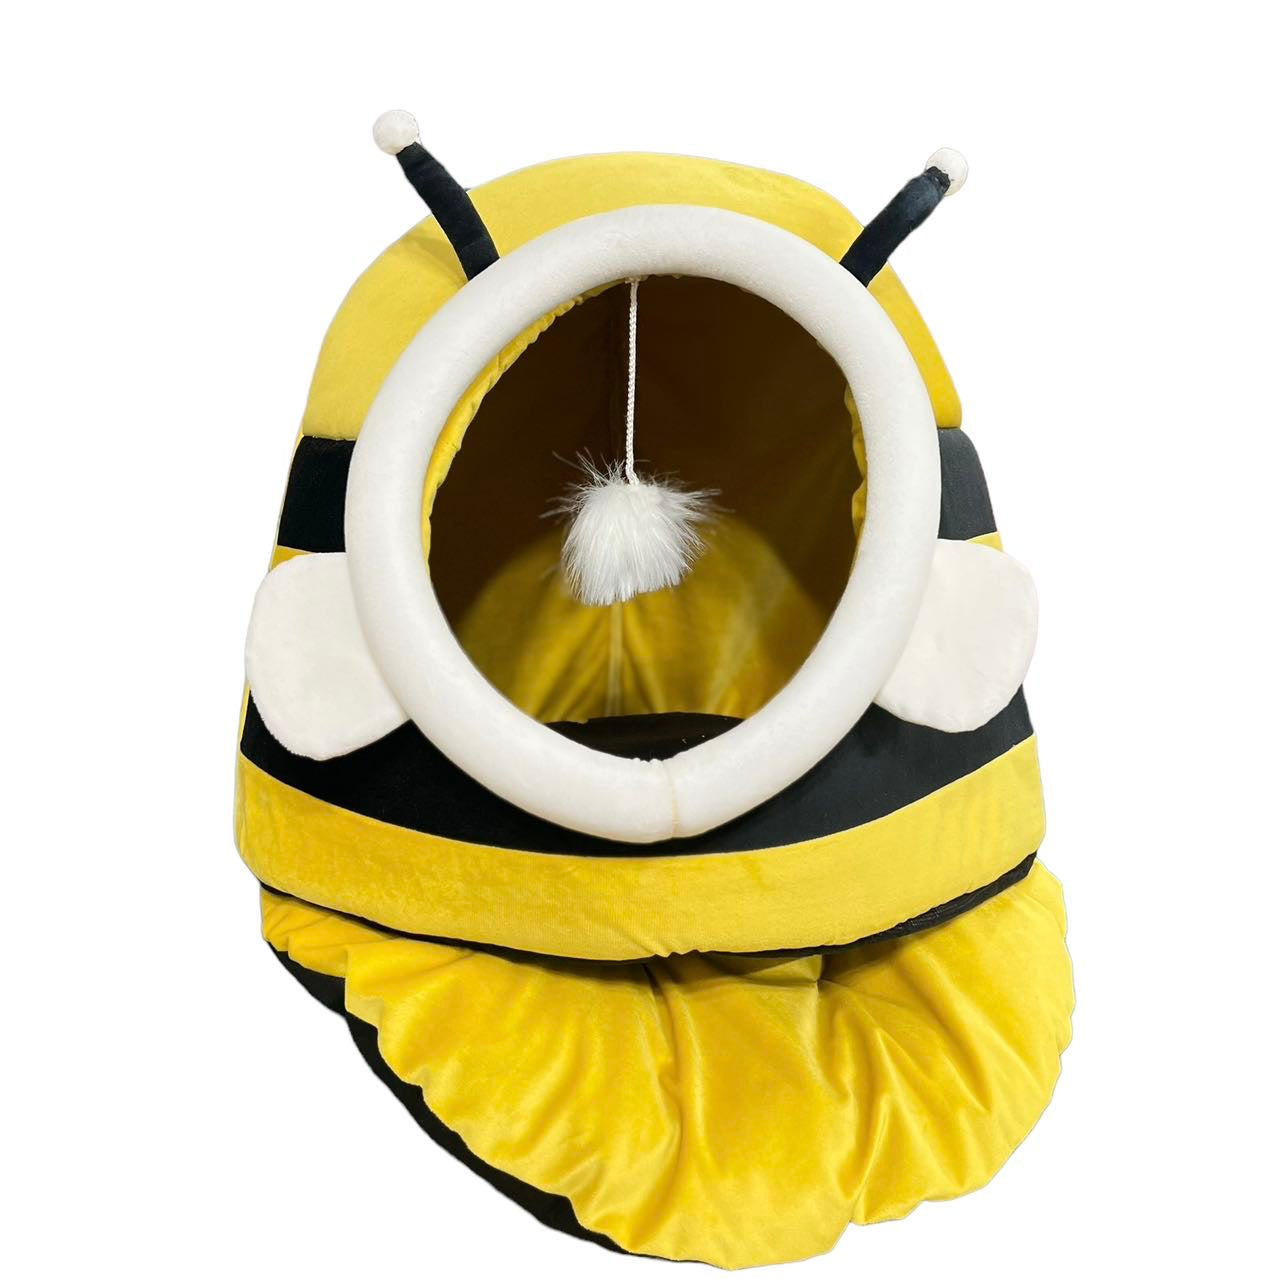 Bumble bee pet house -ROUND  🐝